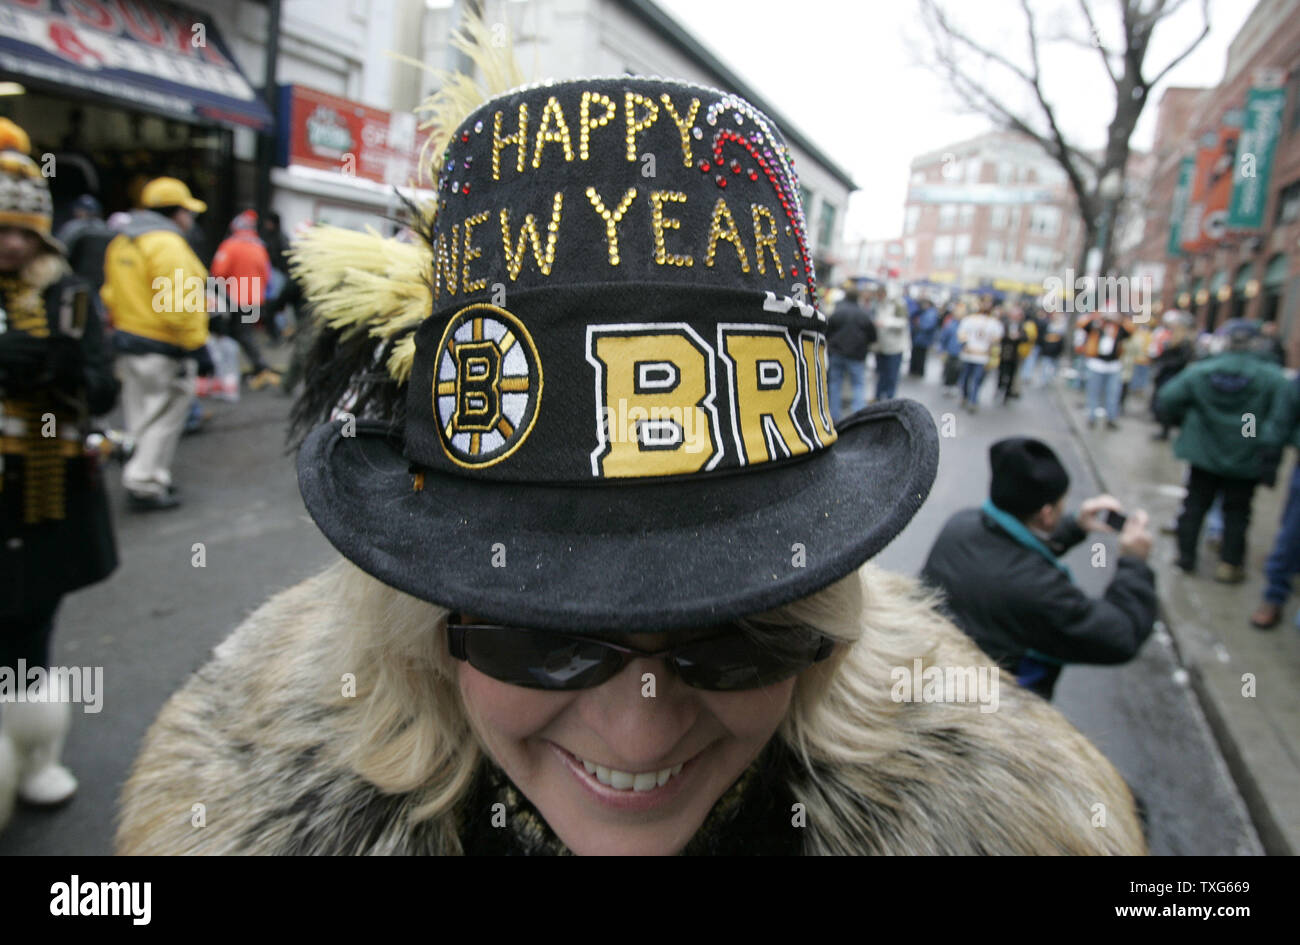 Nhl winter classic fans hi-res stock photography and images - Alamy